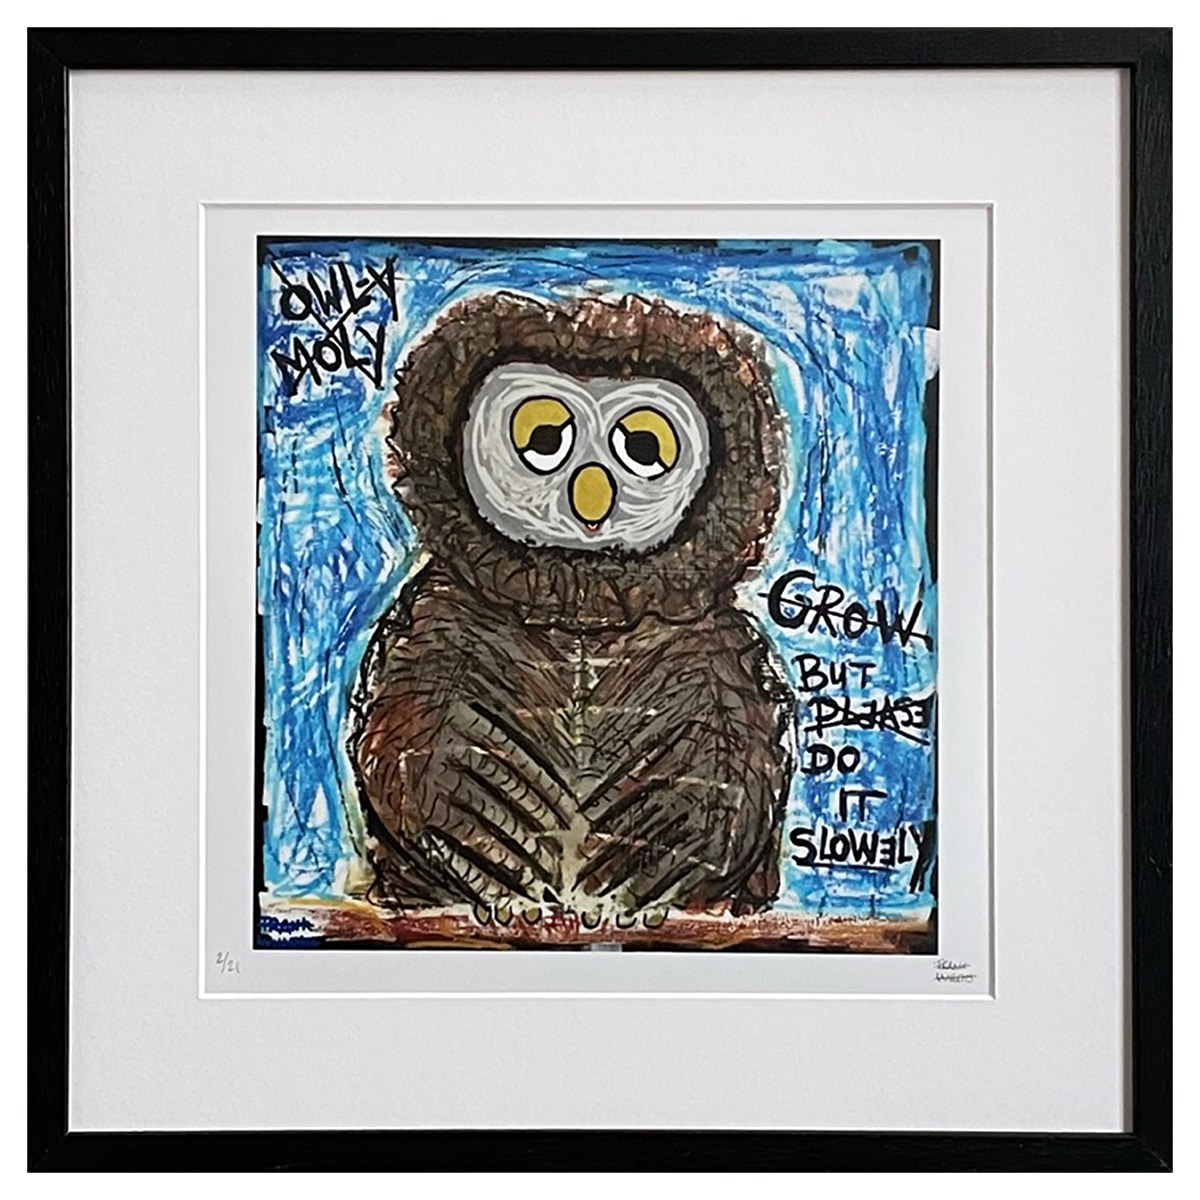 Limited Edt Art Prints - OWL-Y MOLY - Frank Willems